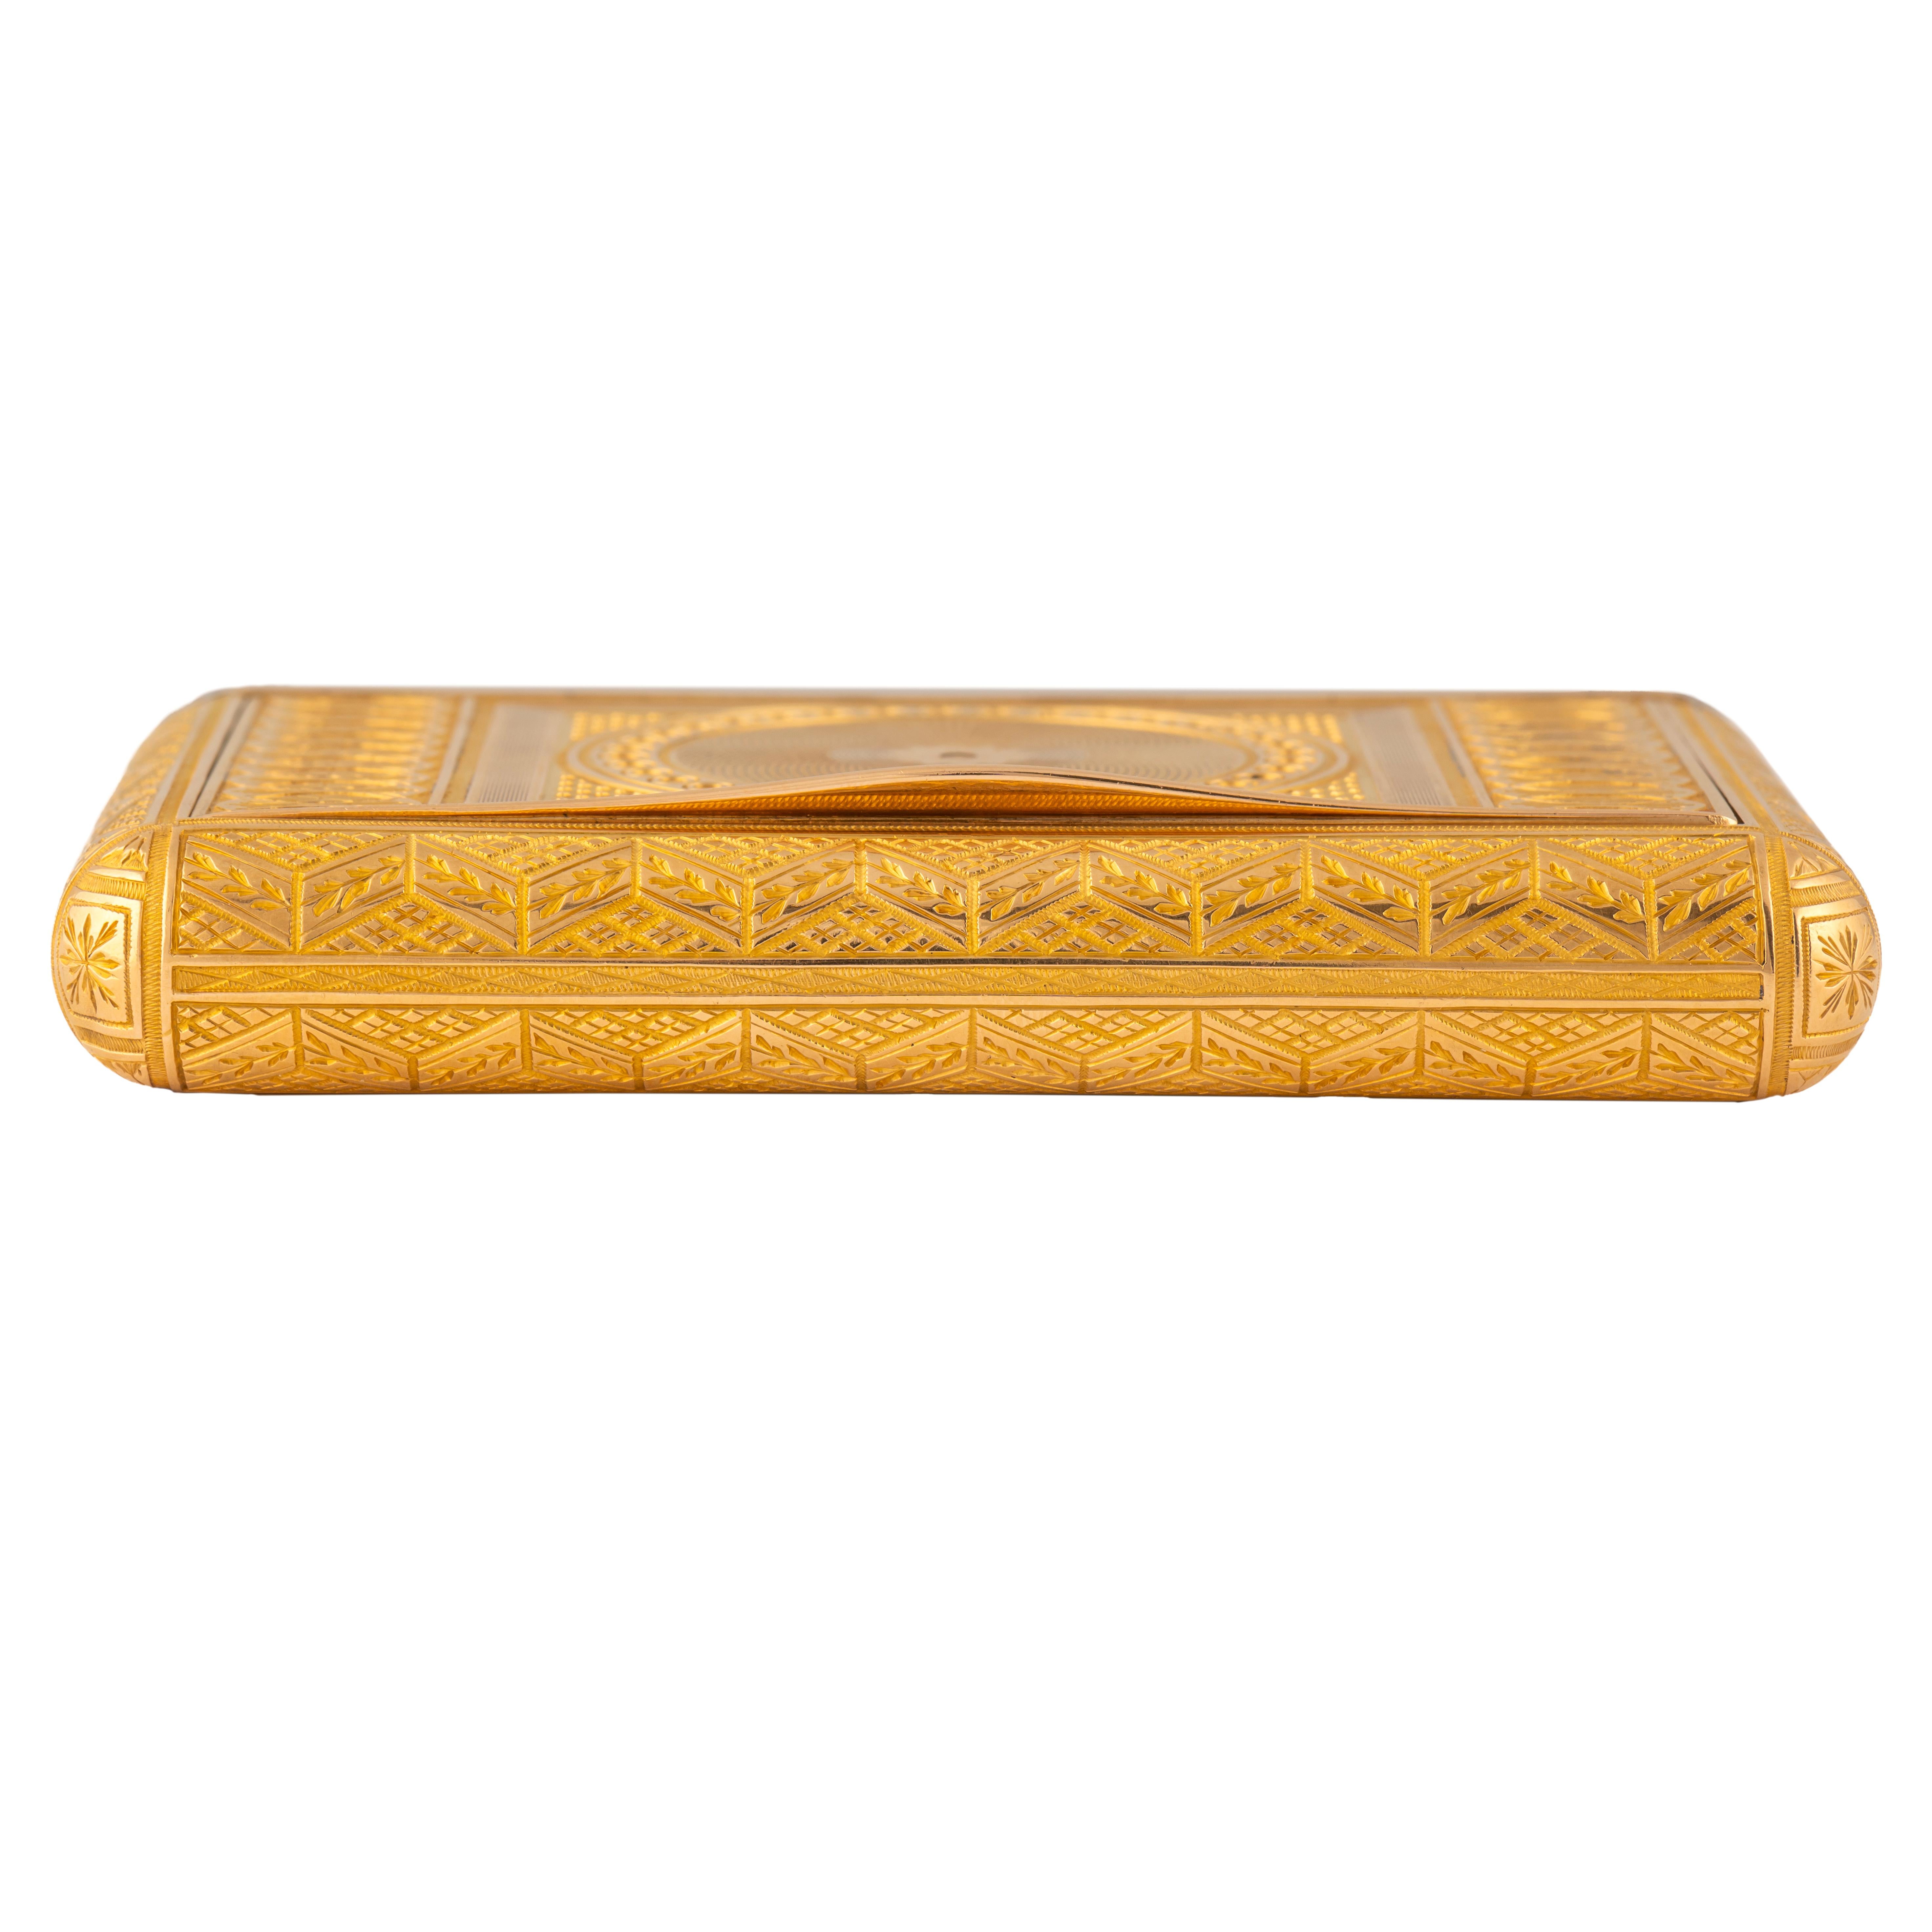 Russian Imperial-era Gold Snuff Box by Keibel, St. Petersburg, circa 1820 For Sale 3